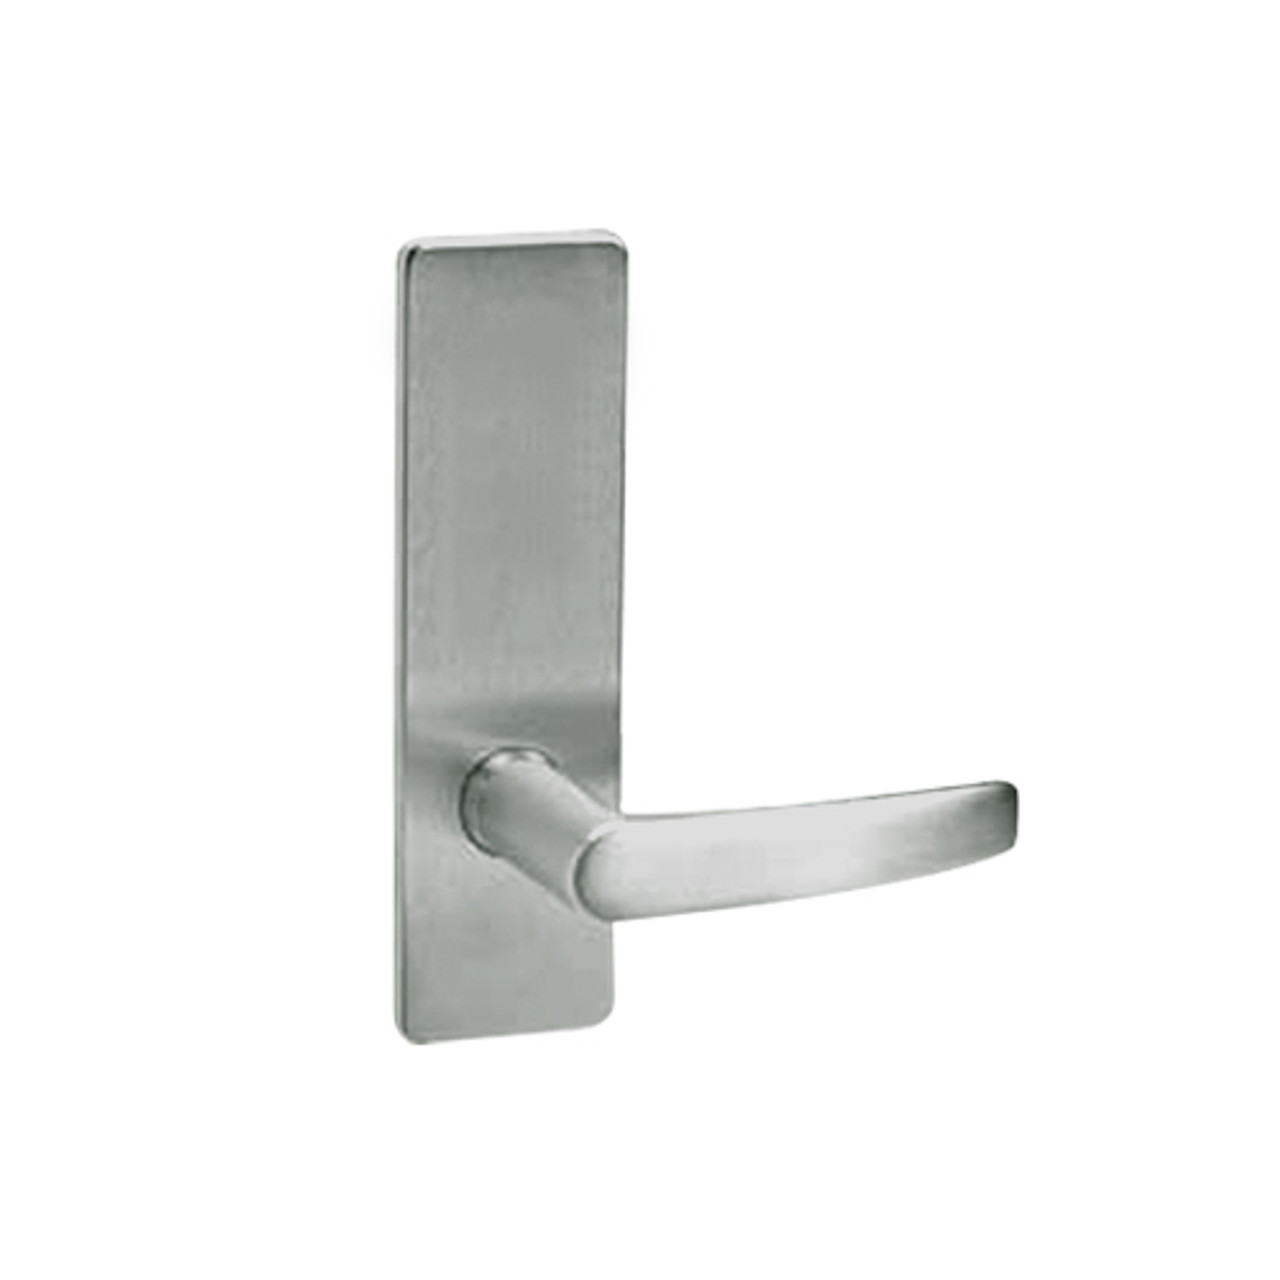 ML2030-ASP-619 Corbin Russwin ML2000 Series Mortise Privacy Locksets with Armstrong Lever in Satin Nickel